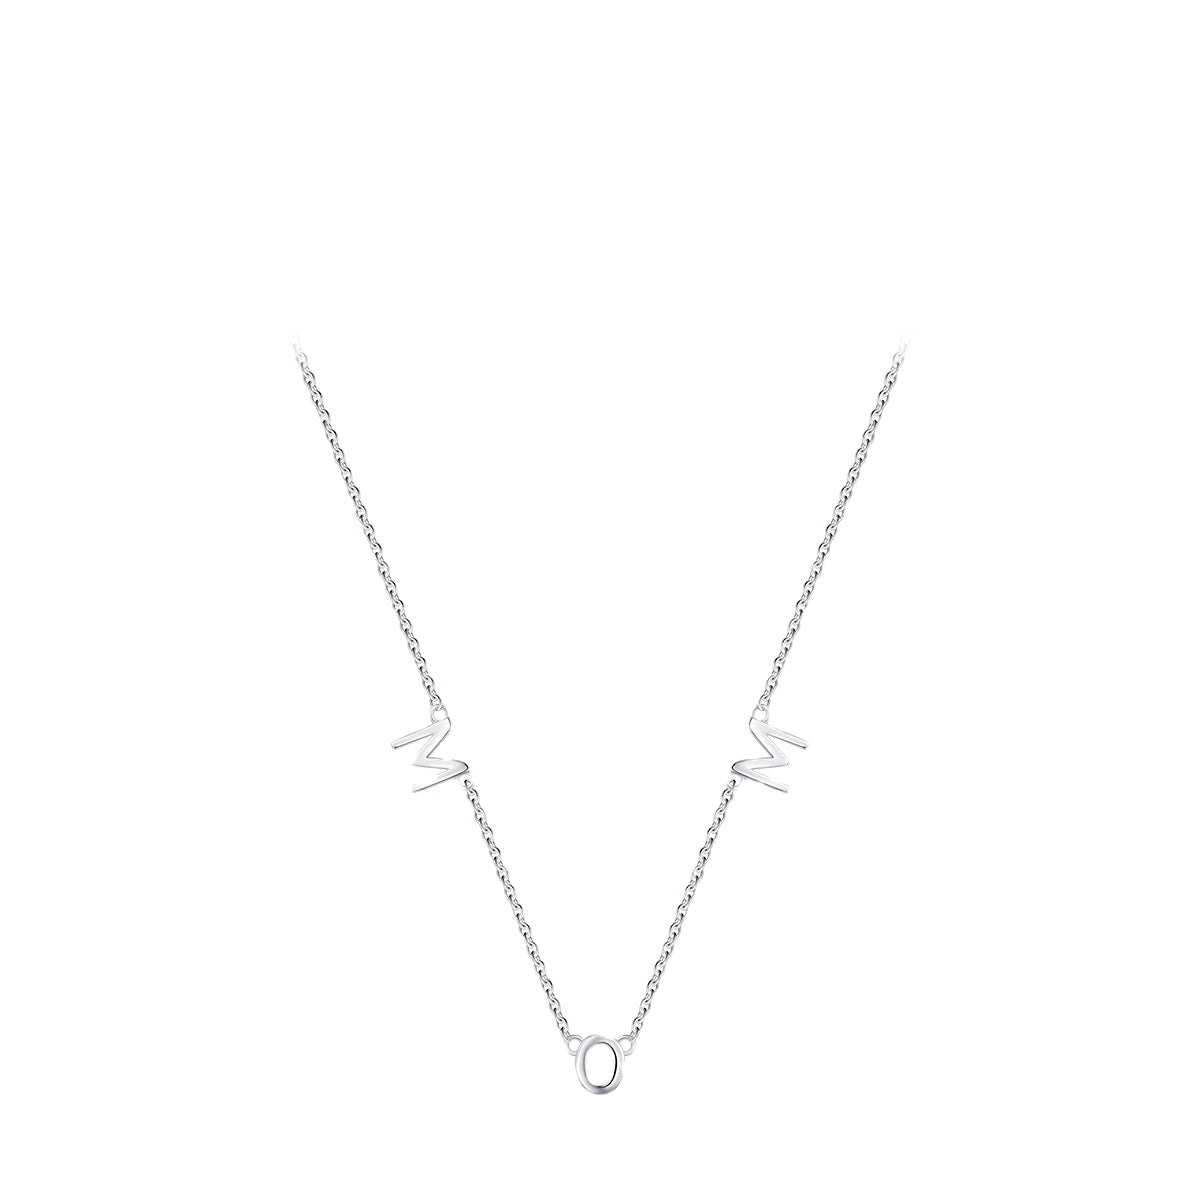 Mother's Sterling Silver Necklace